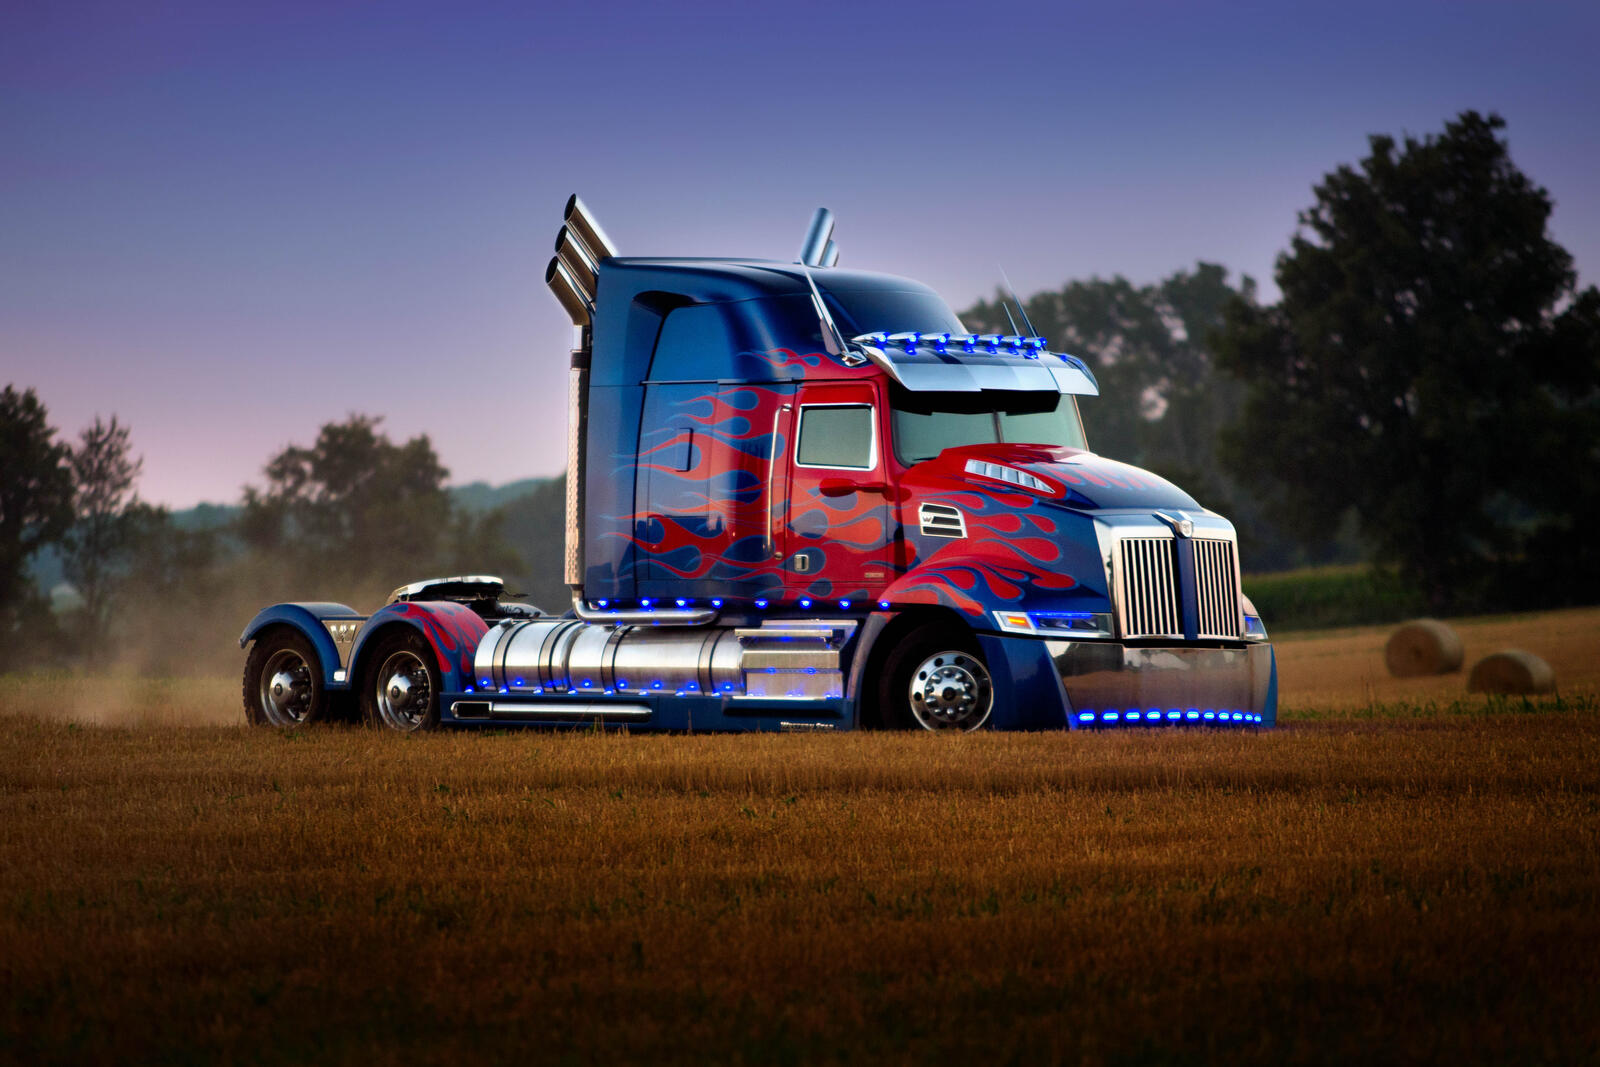 Wallpapers truck Transformers The Last Knight movies on the desktop